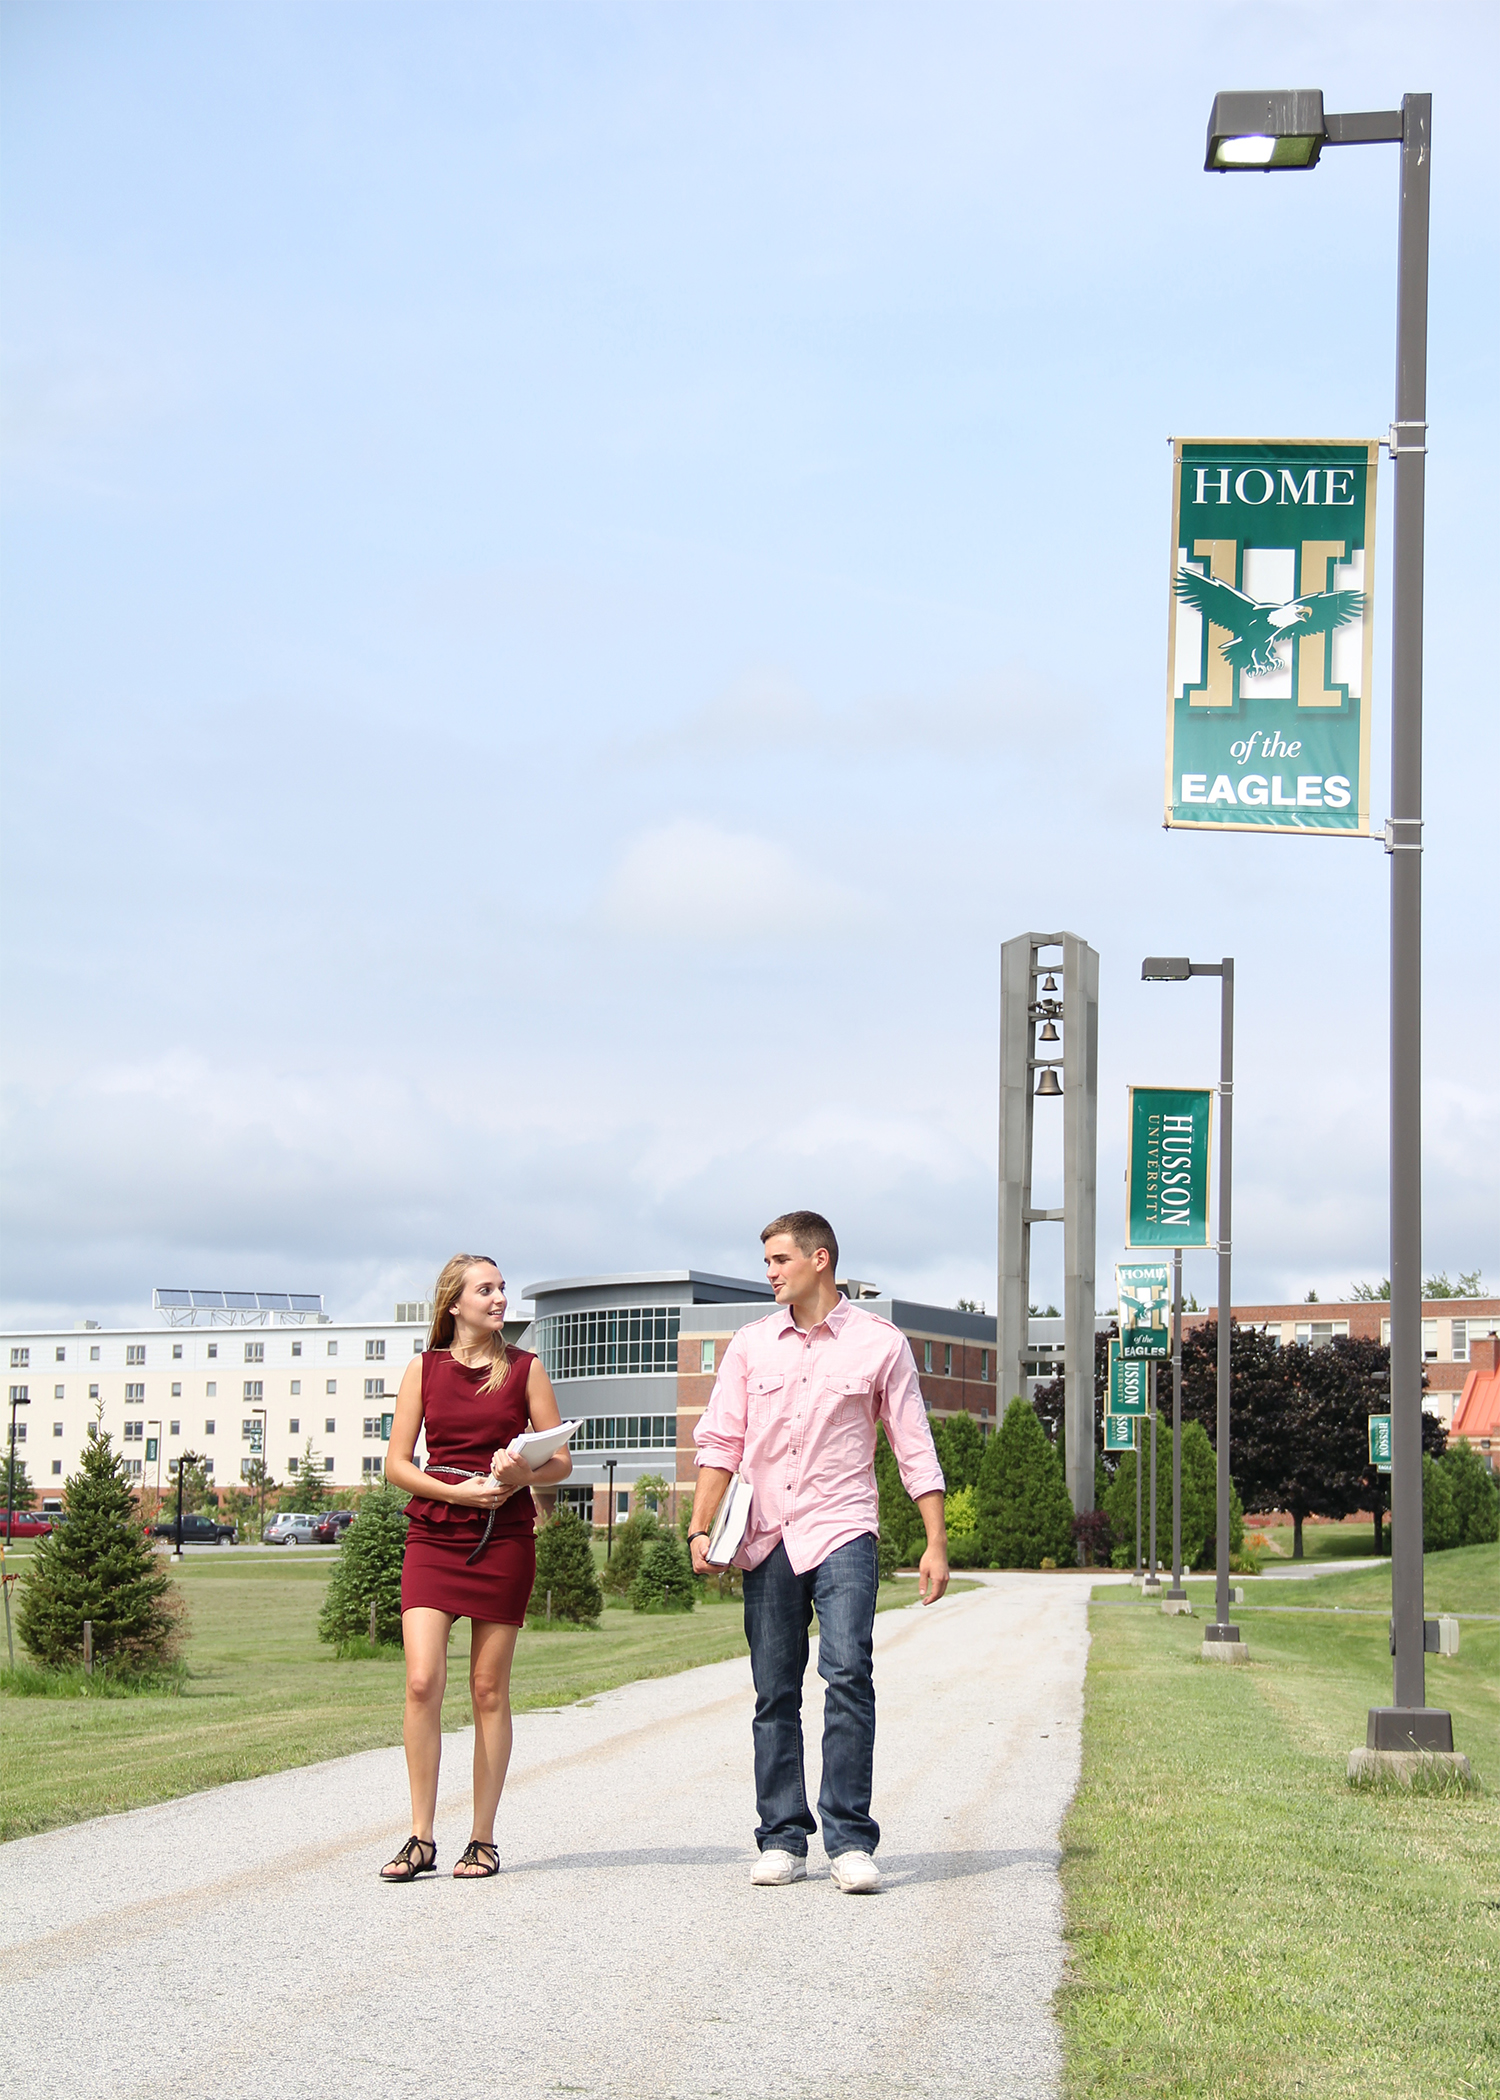 The campus of Husson University is located on a beautiful 208-acre campus in scenic Bangor, Maine